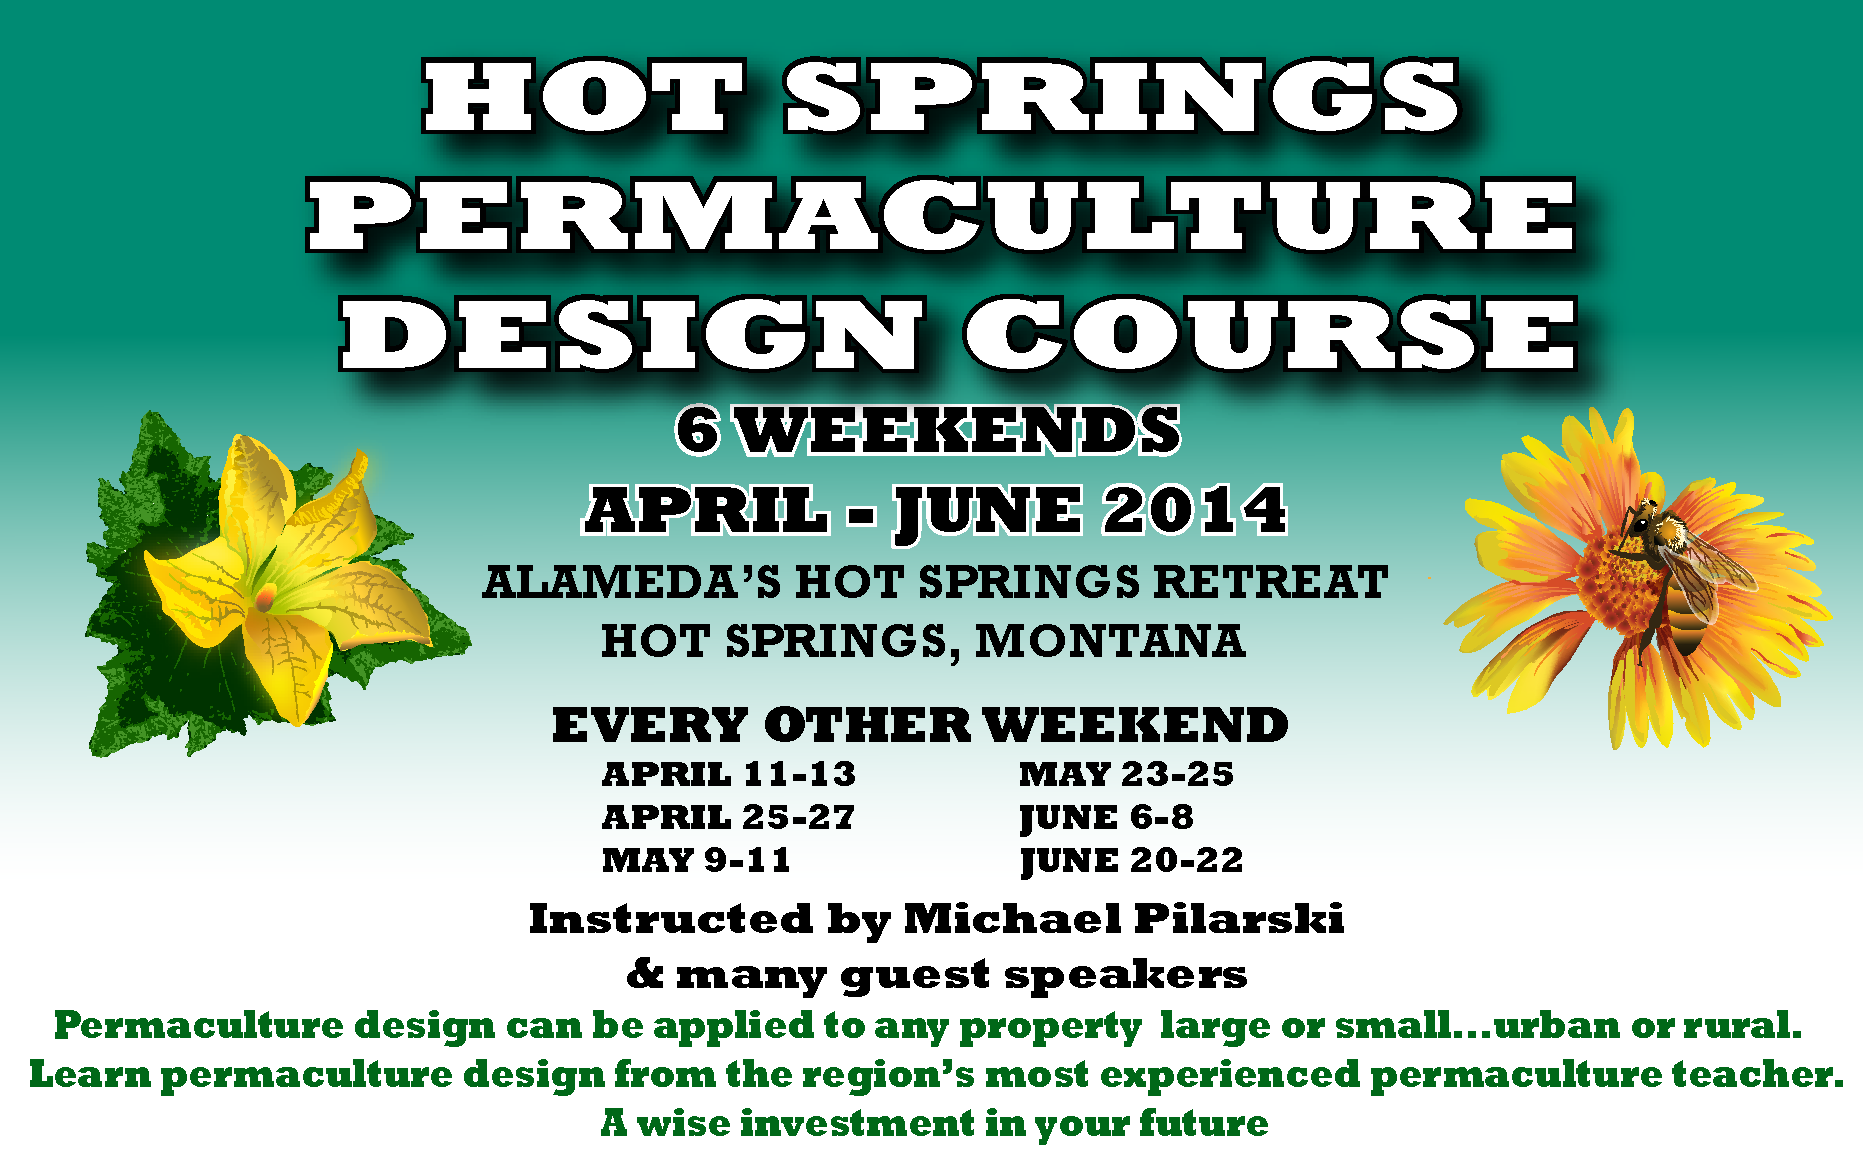 Permaculture Design Course with Michael Pilarski - Hot Springs, MT - April to June